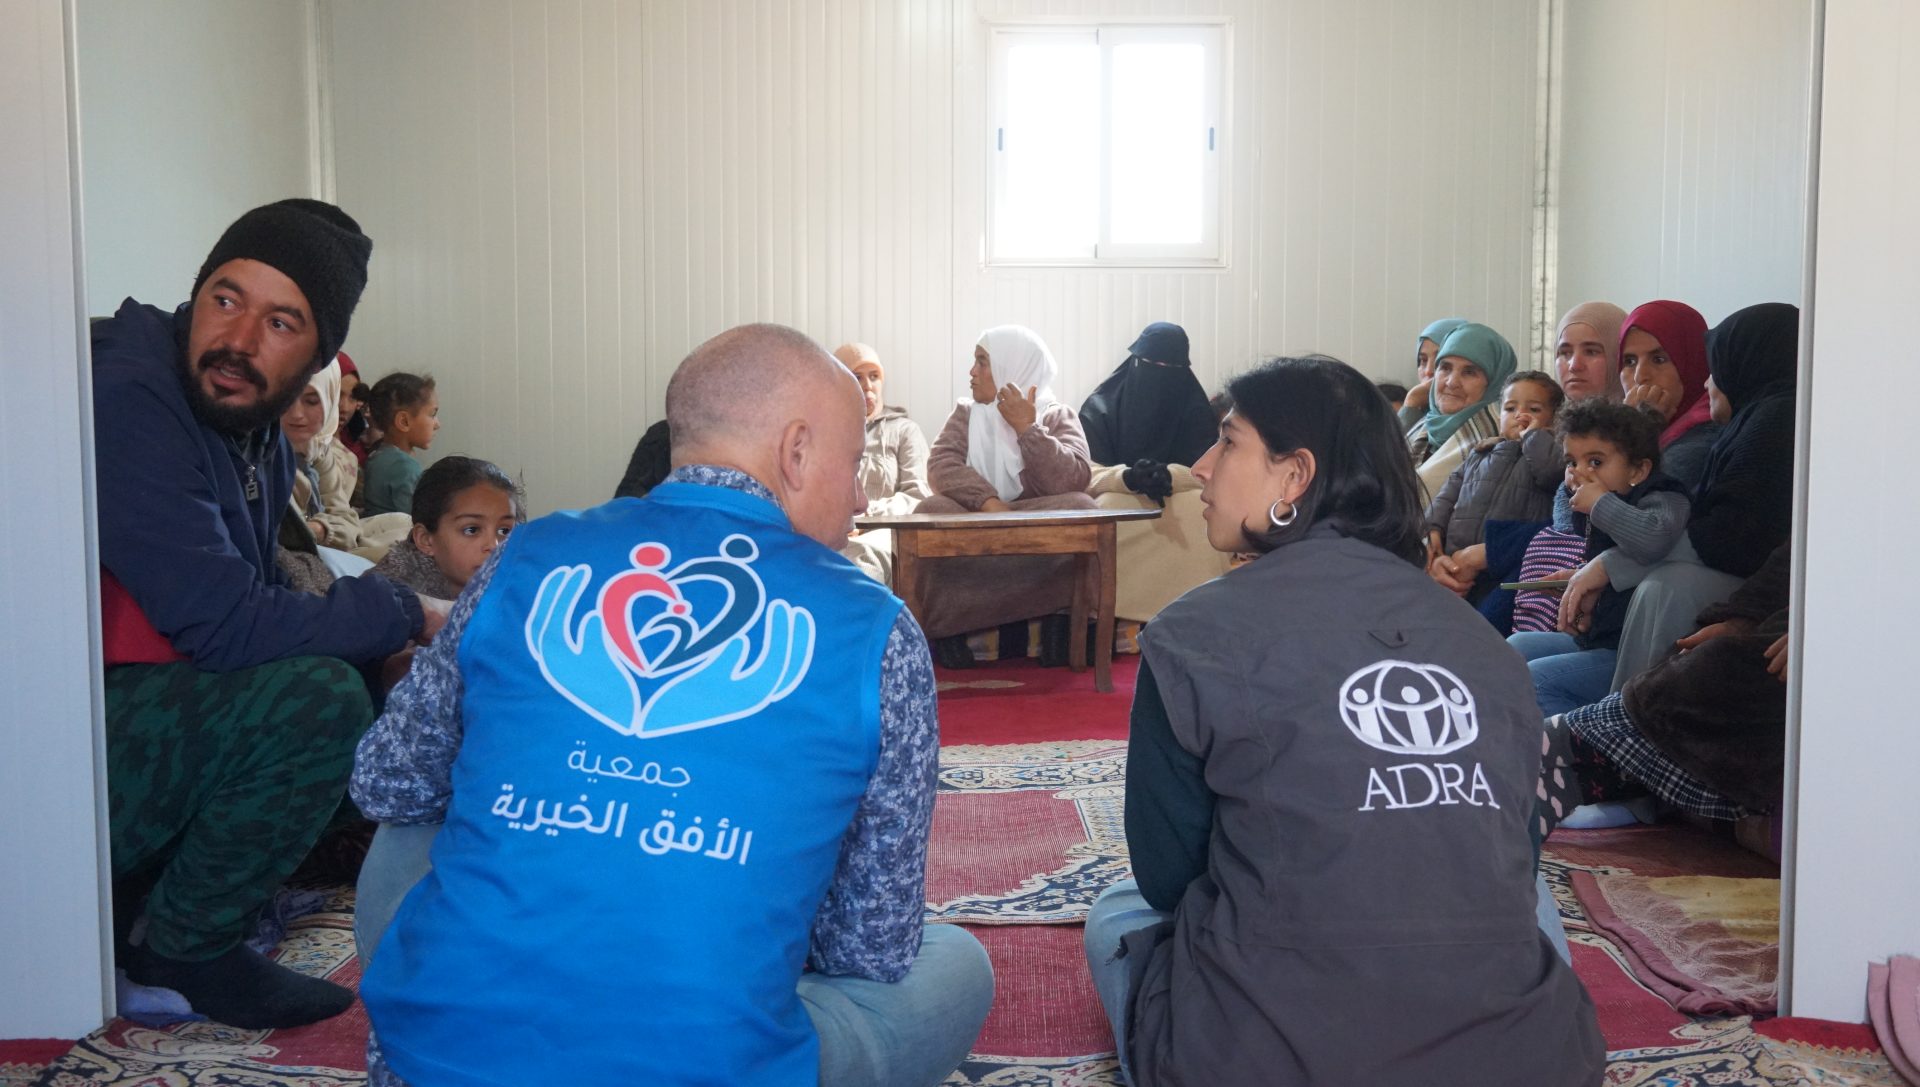 Handover of temporary shelters by ADRA Spain in Morocco